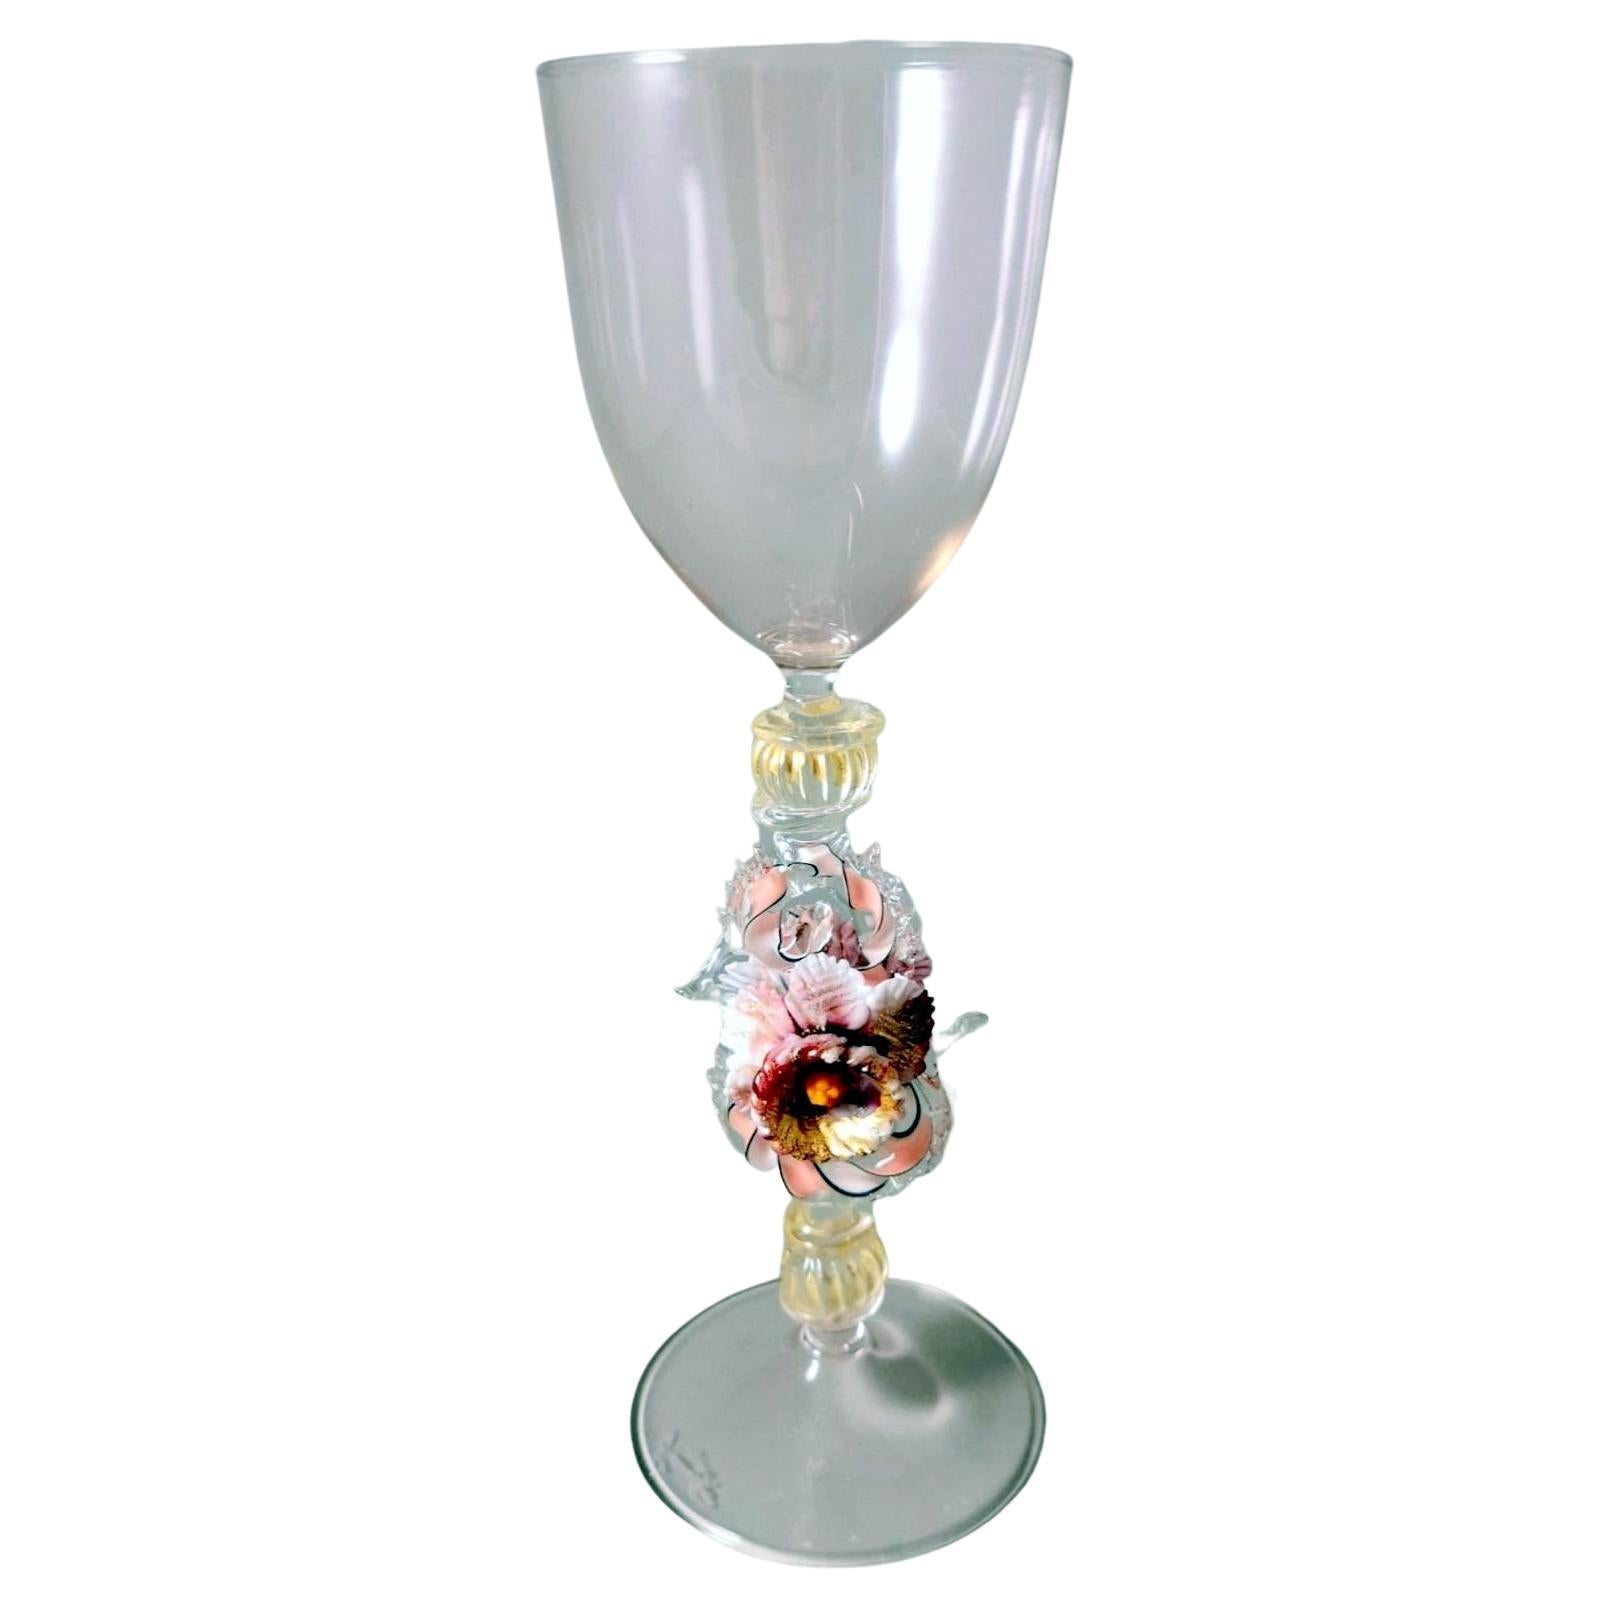 Murano Glass Goblet "Tipetto" Pink Blown Glass With Flower Decoration